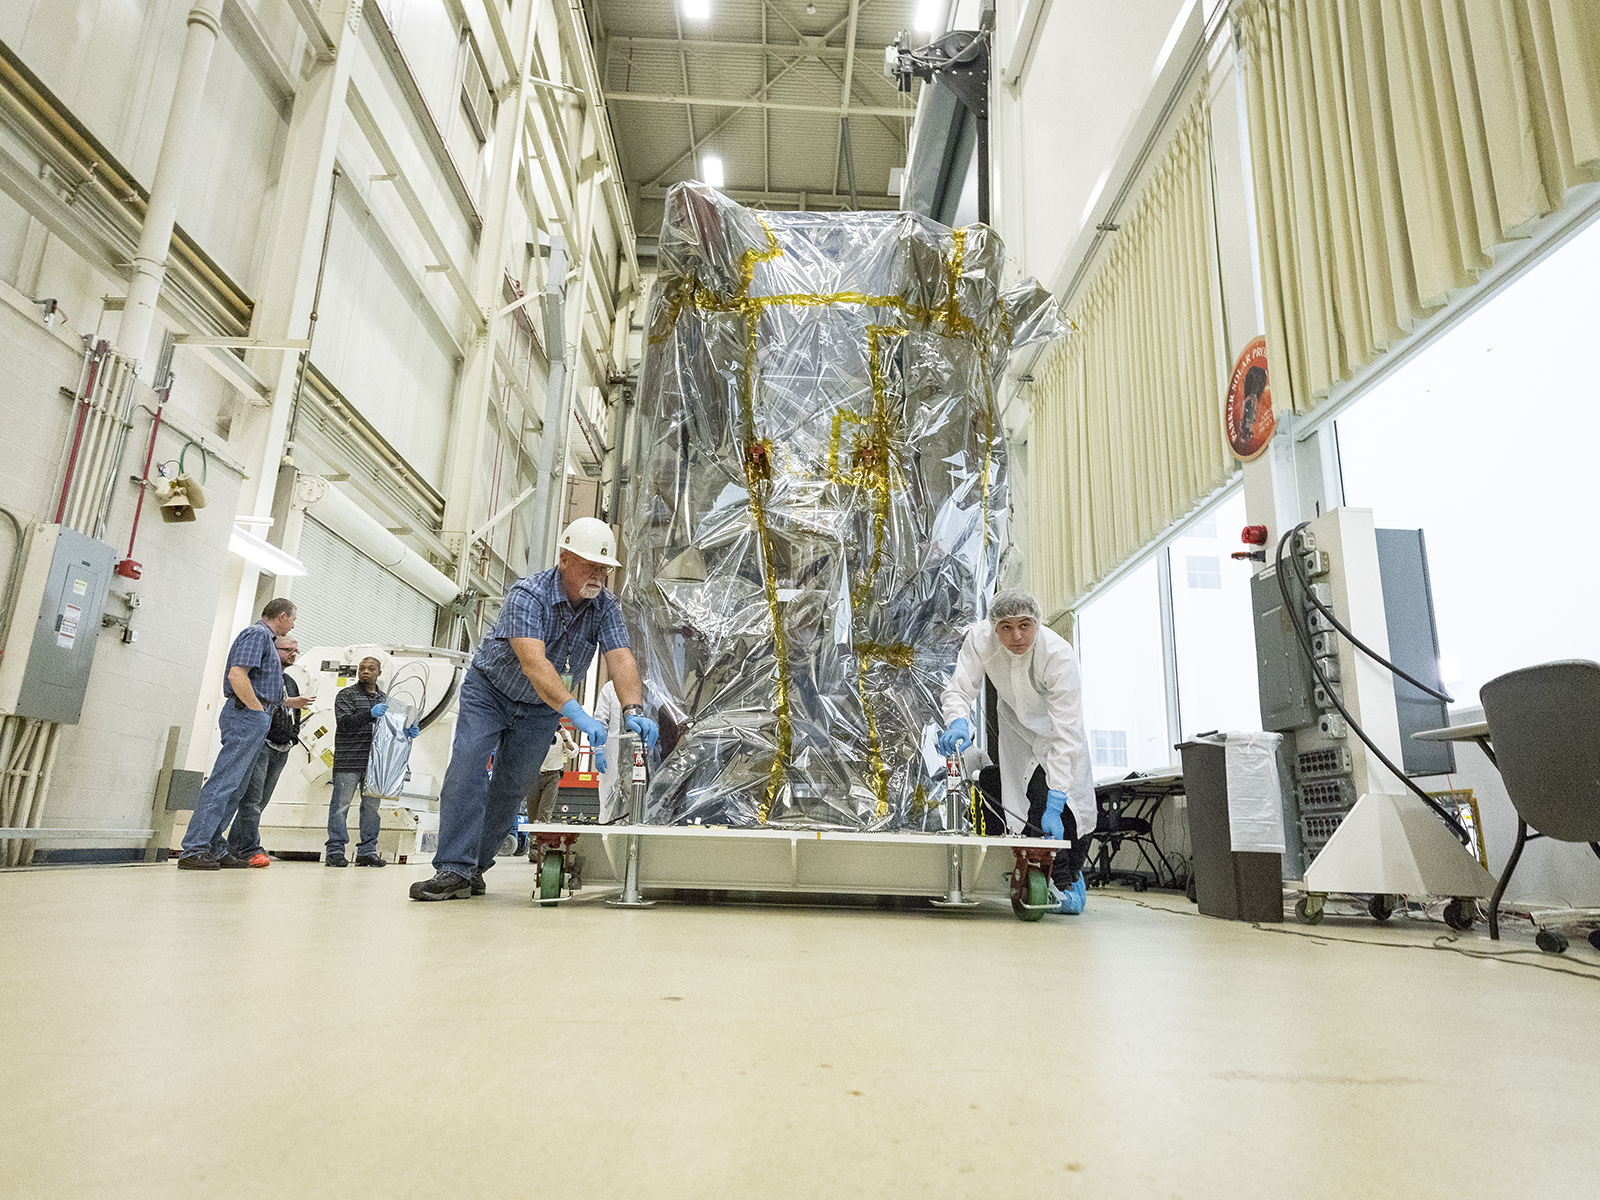 Member of the NASA Parker Solar Probe team wheel the spacecraft – bagged to protect it from contamination – from its cleanroom at NASA’s Goddard Space Flight Center in Greenbelt, Md., to the thermal vacuum chamber, where it will undergo approximately seven weeks of testing at extreme temperatures that will simulate the space environment. 